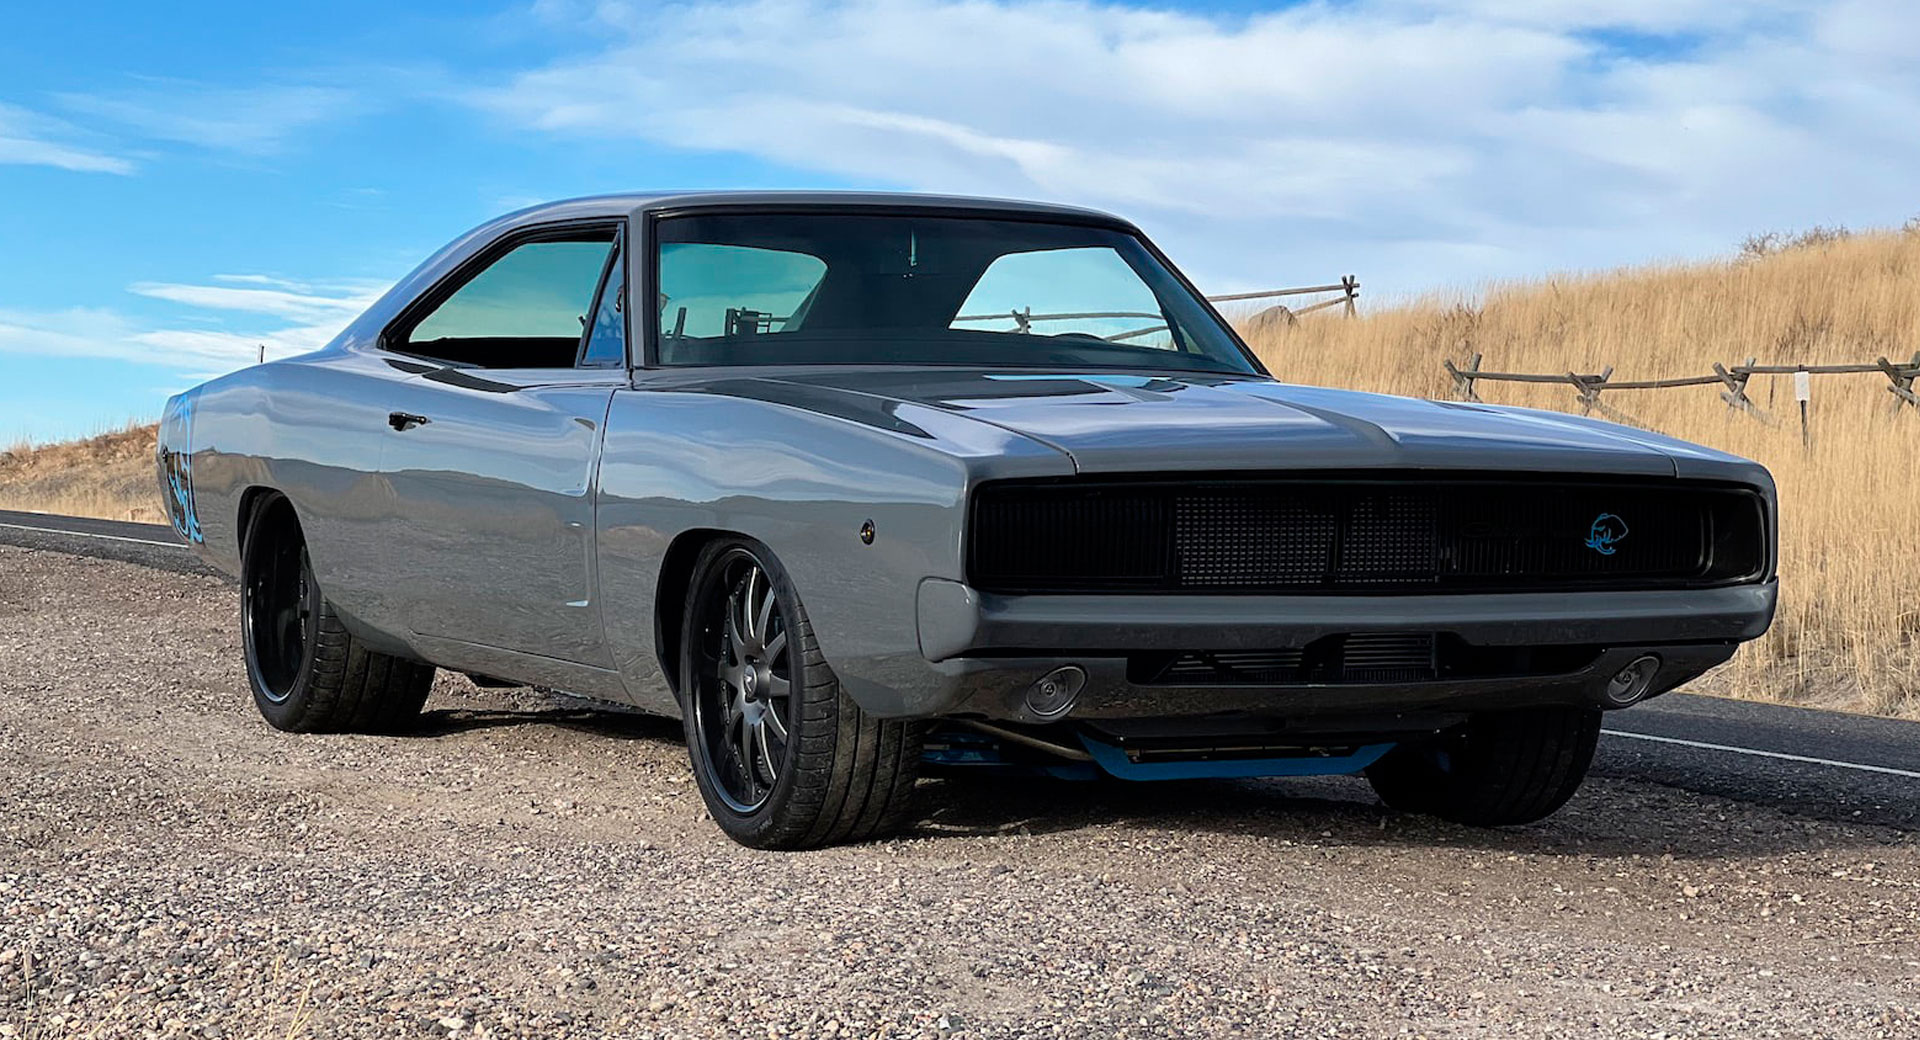 Dumbo, The Hellephant-Powered 1968 Dodge Charger With 1,000 HP, Is Going Up  For Auction | Carscoops